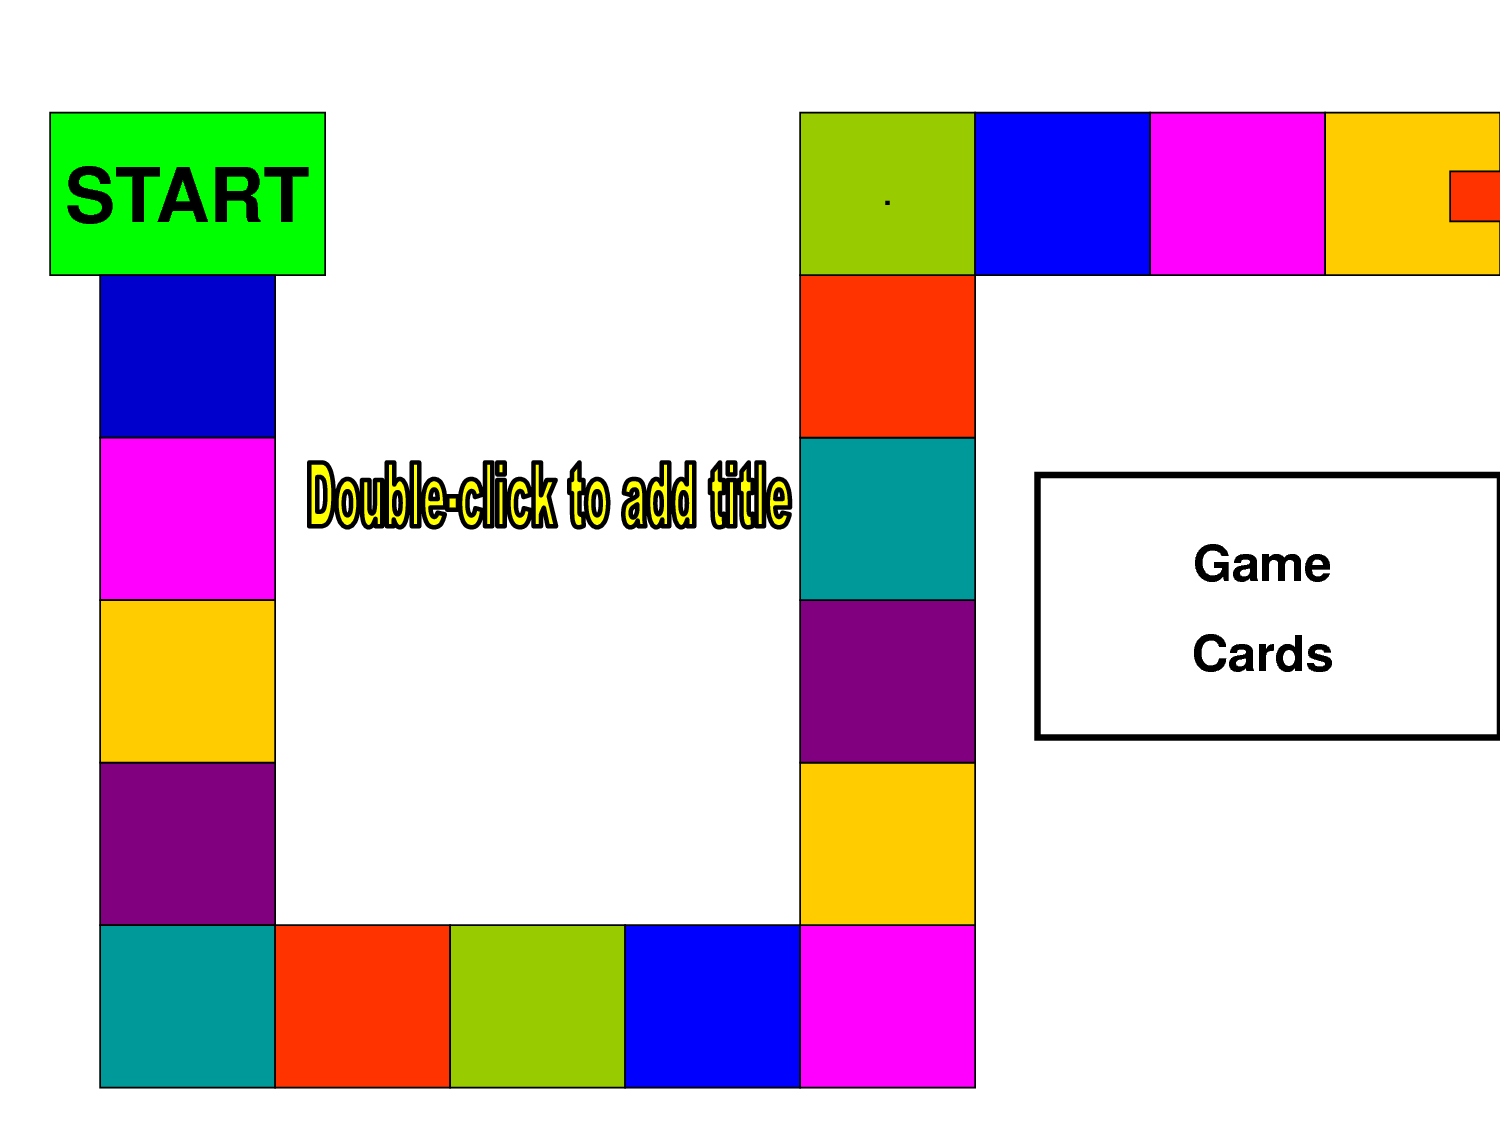 5 Best Images of File Folder Game Printable Template - Game Board ...